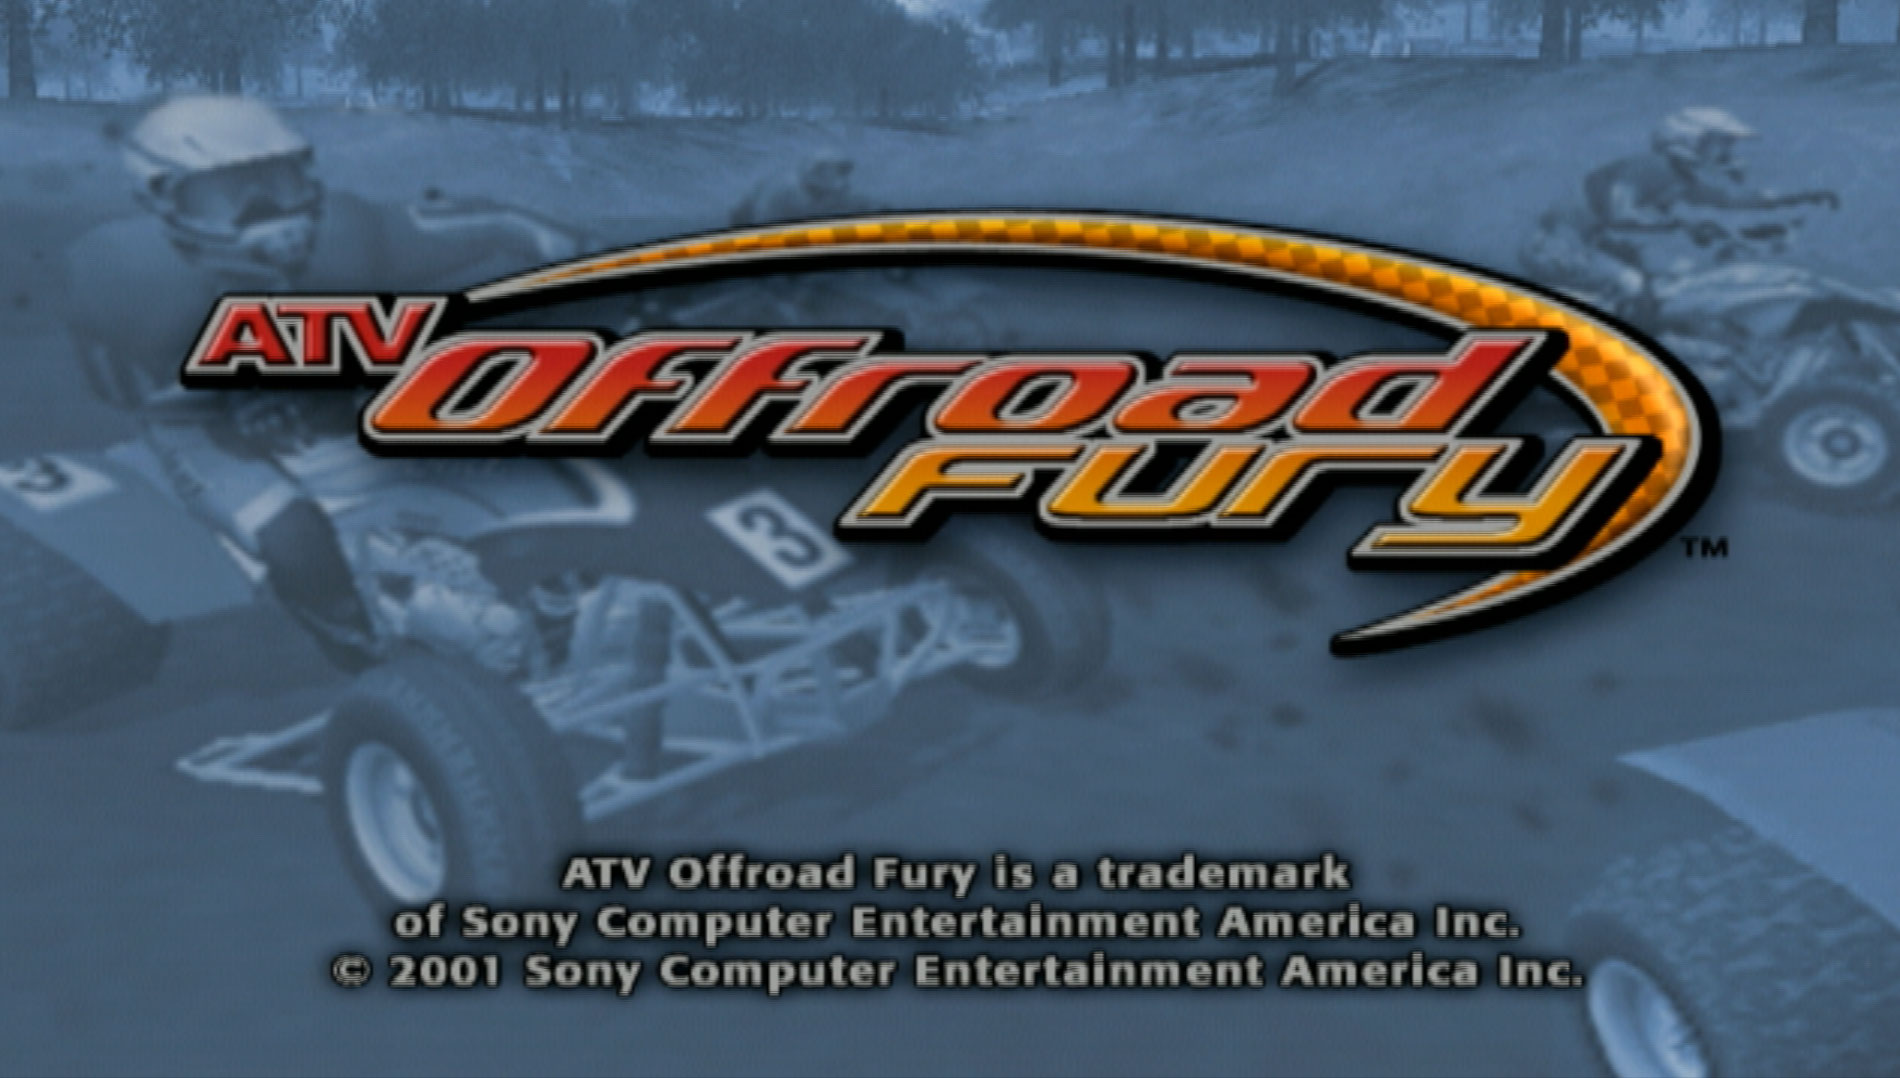 ATV Offroad Fury PS2 title screen